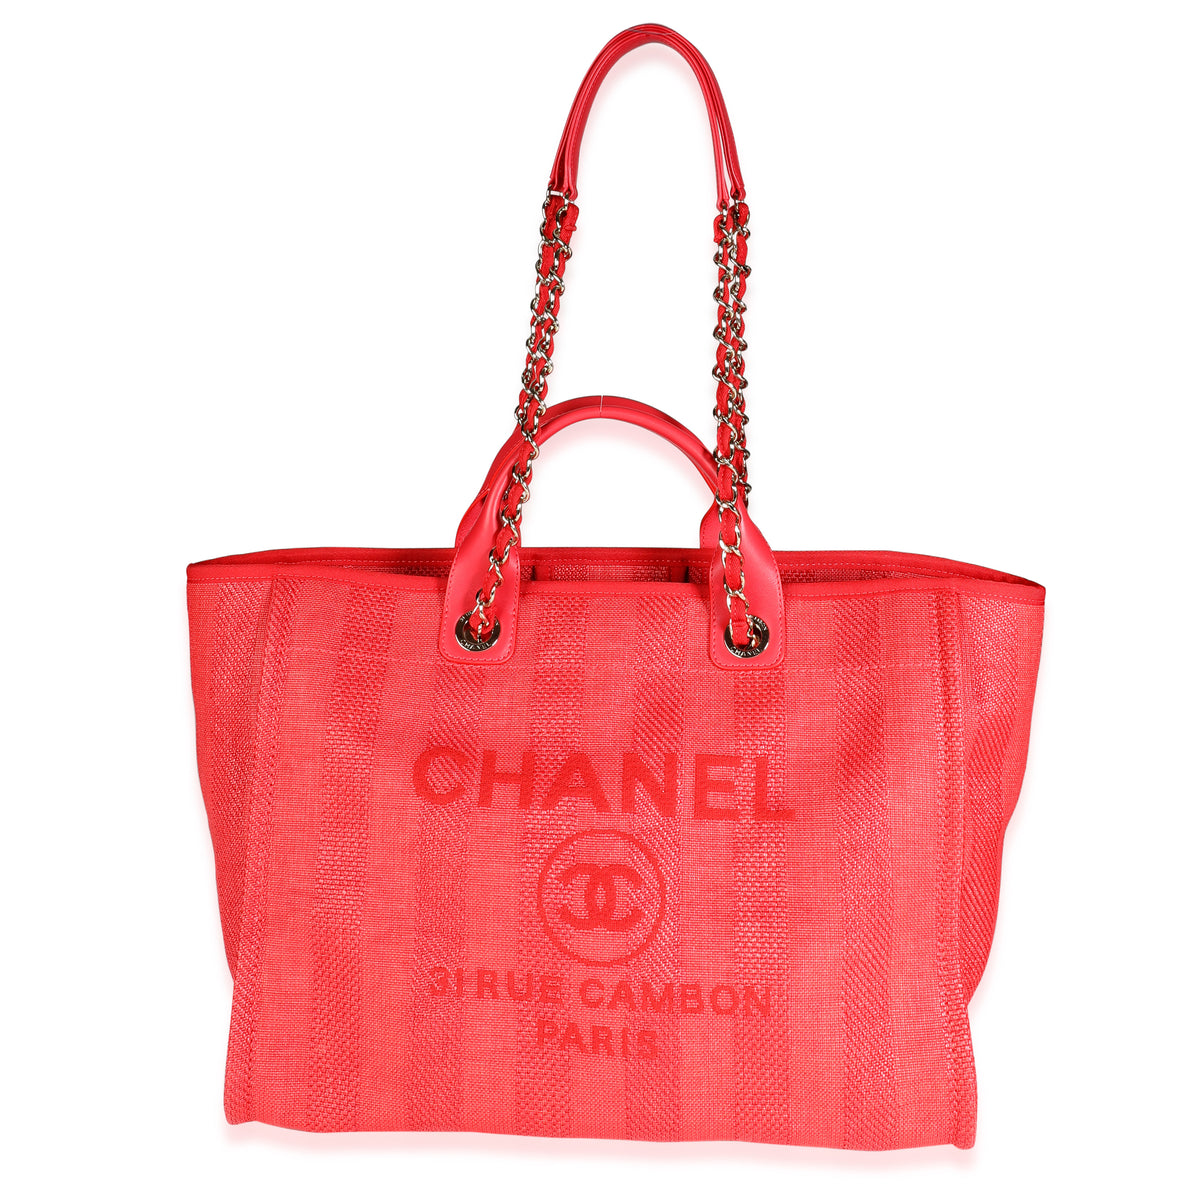 Chanel Red Canvas & Leather Large Deauville Tote, myGemma, QA